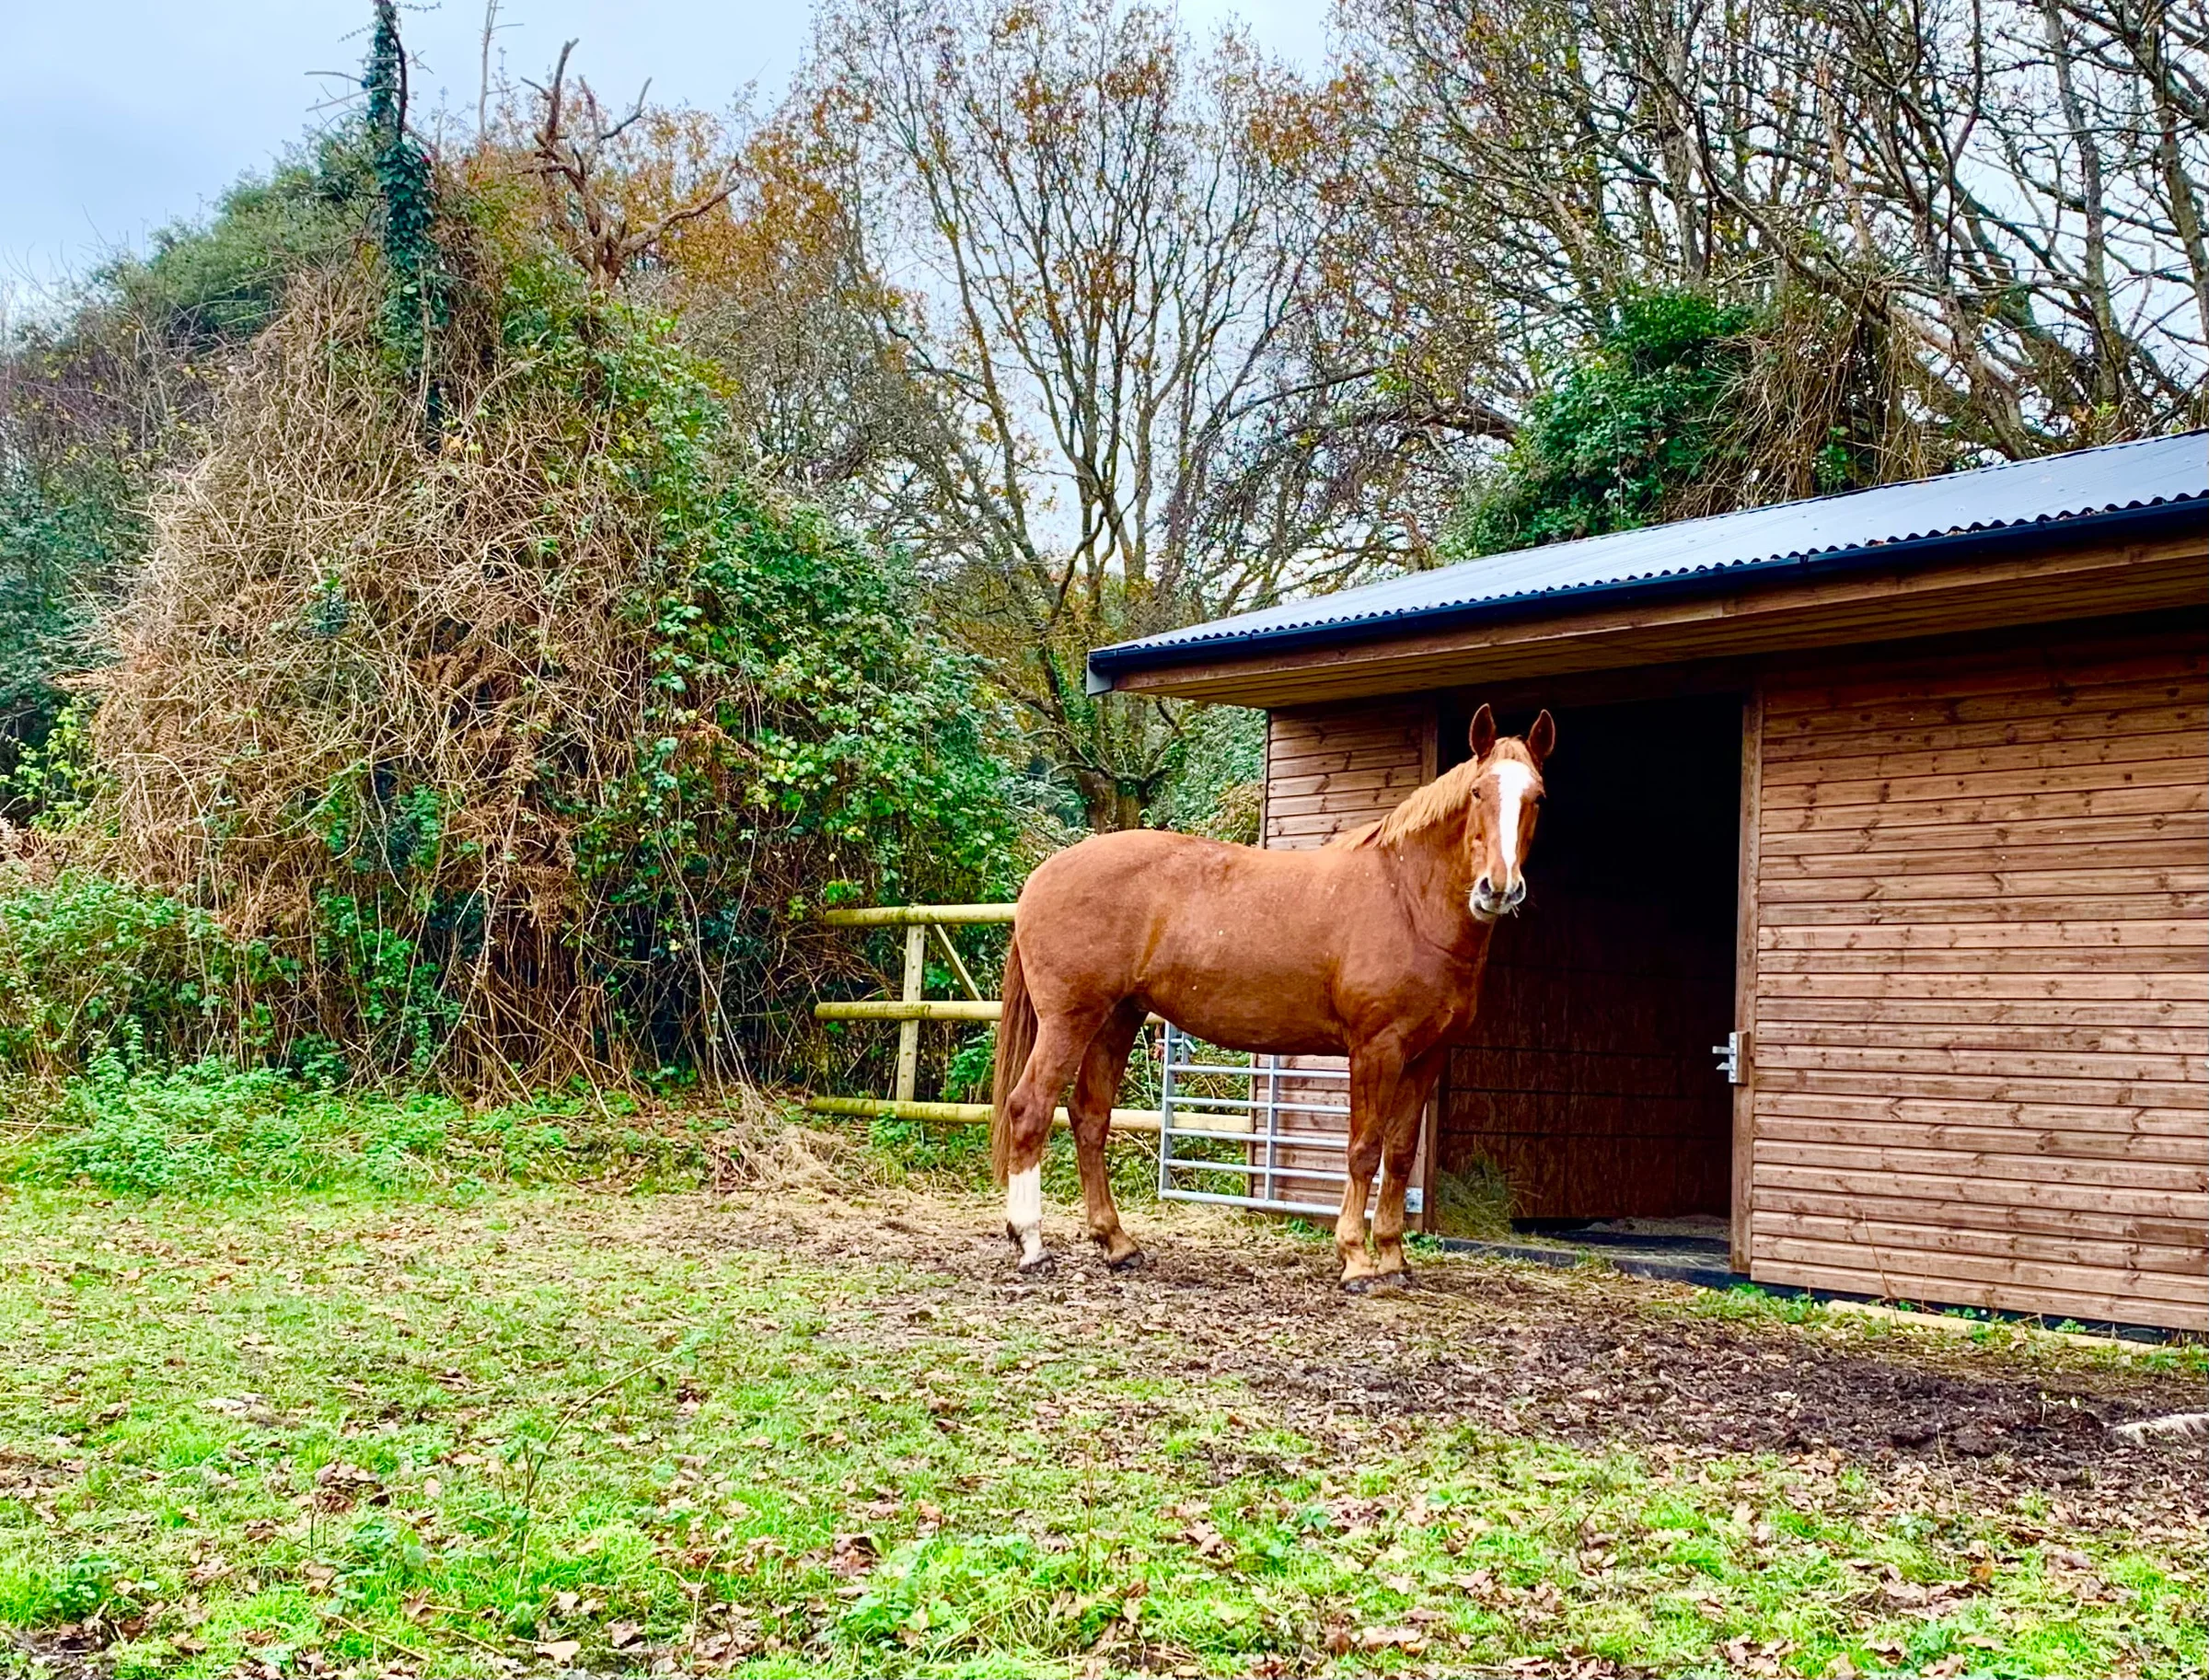 Bring your own horse to stay at Studland Stables